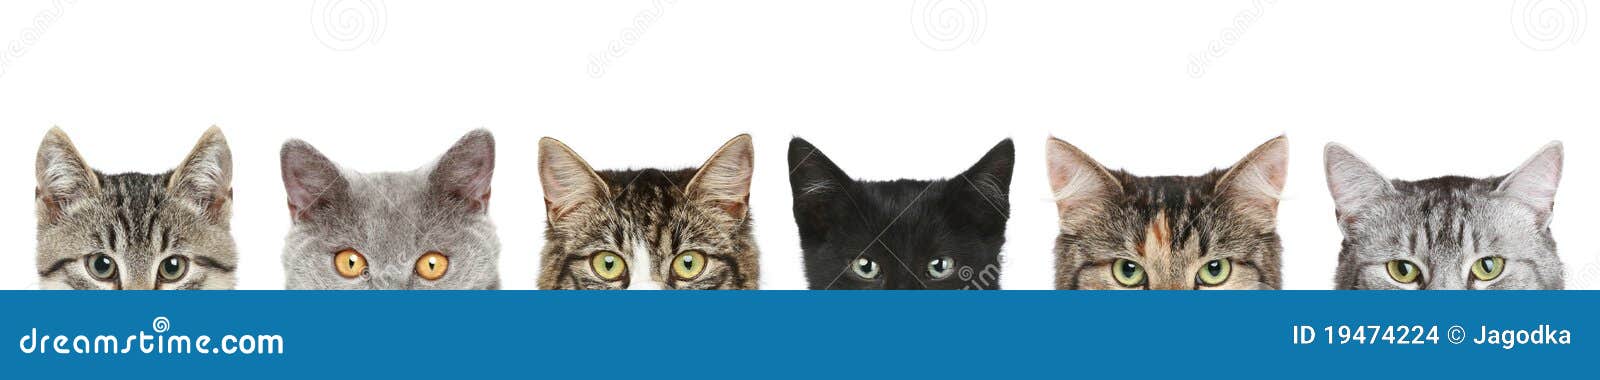 cats half heads on a white background